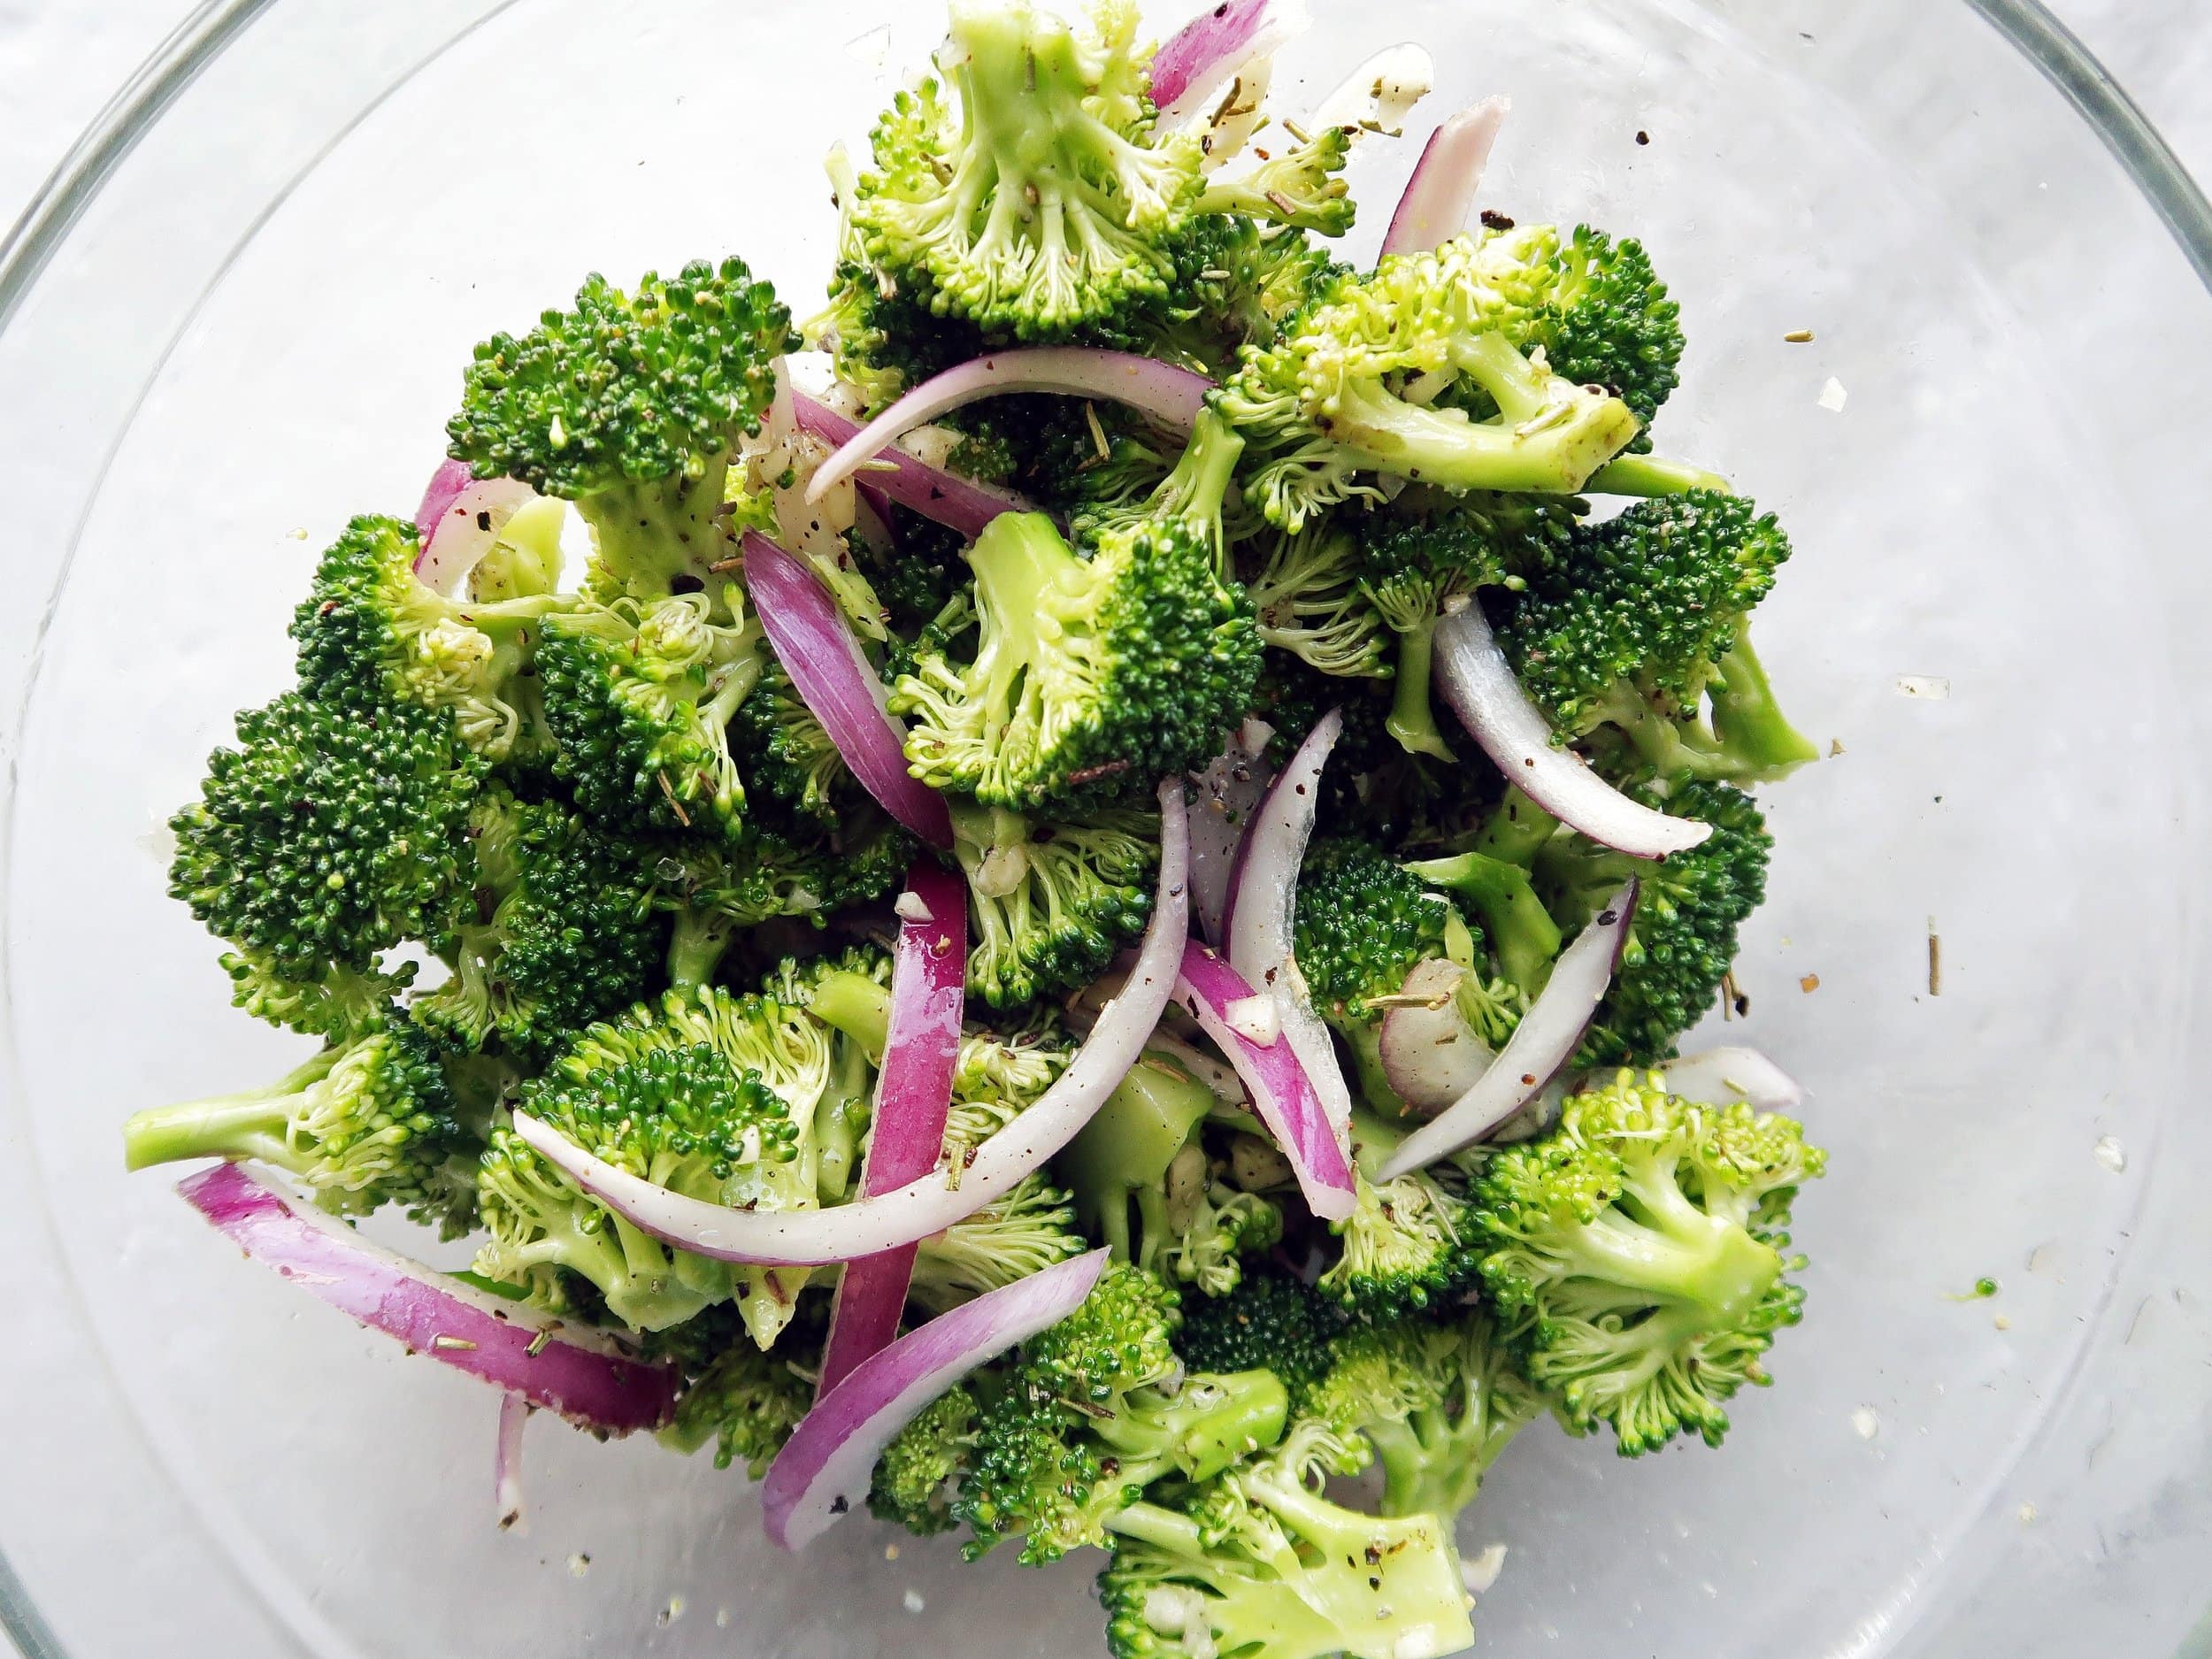 Broccoli, red onion slices, garlic, and herbs in a glass bowl.